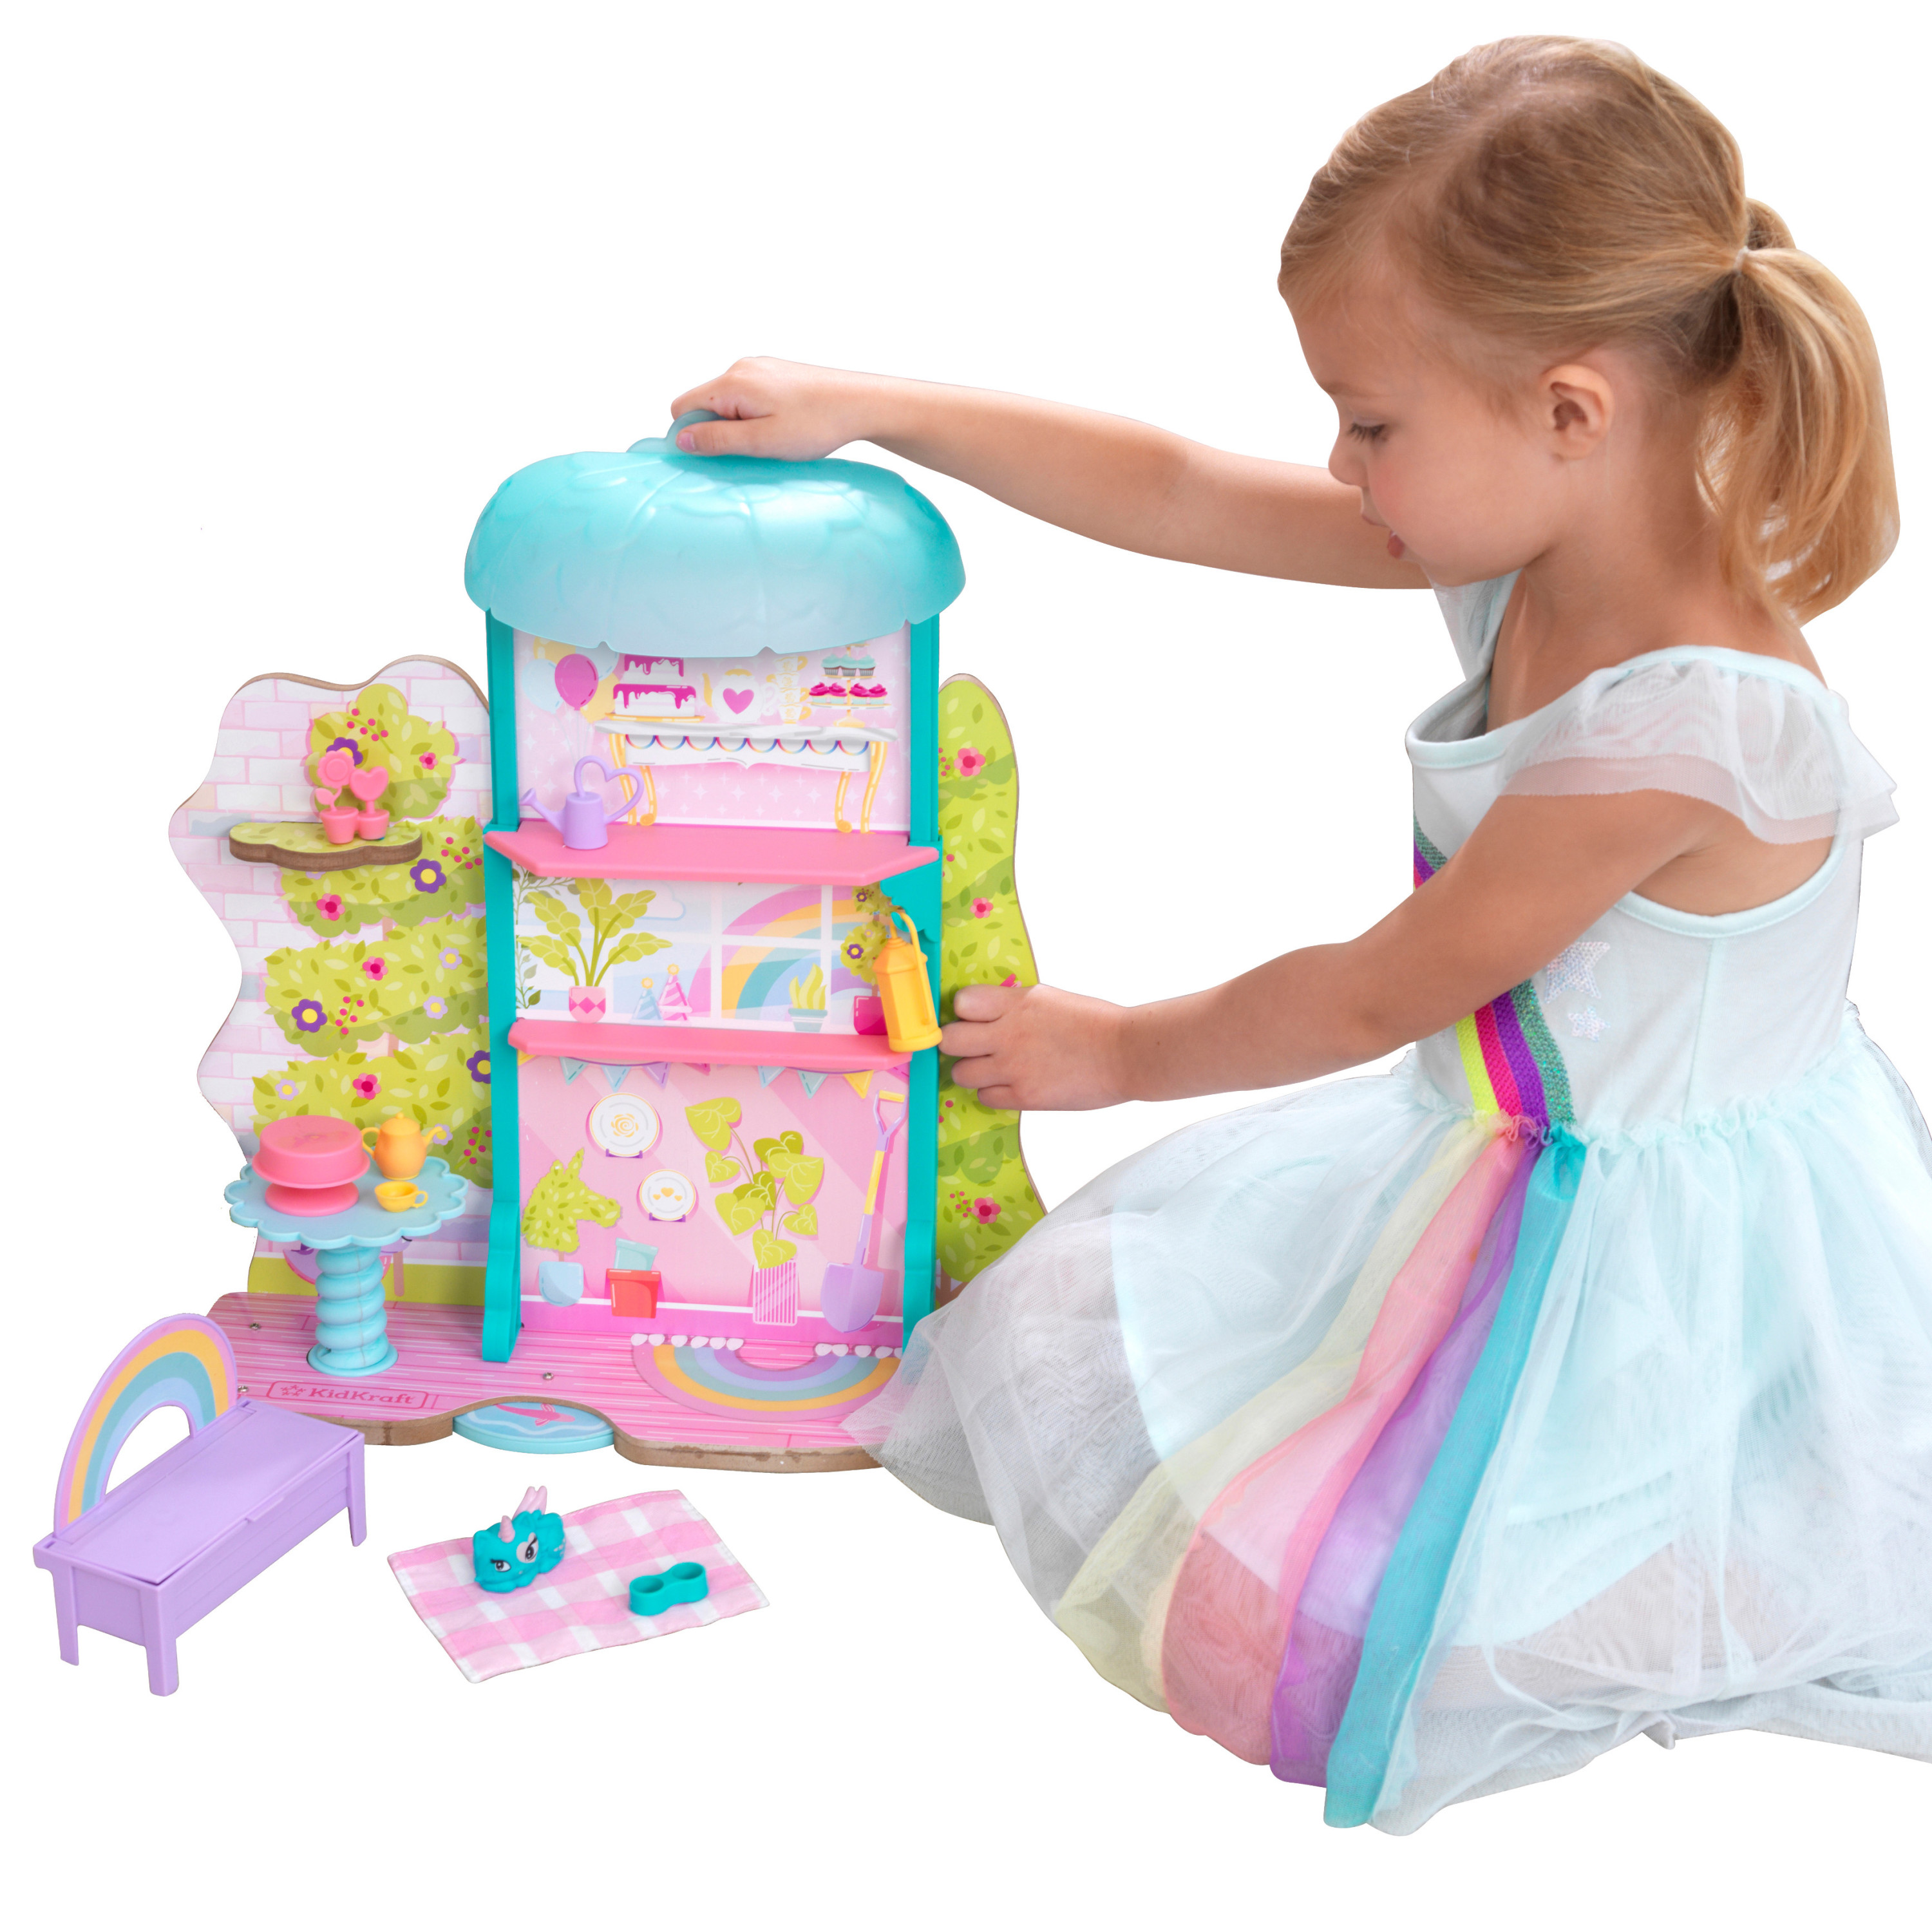 KidKraft Rainbow Dreamers Wooden Treetop Tea Time Gazebo Play Set with 10 Accessories - image 3 of 7